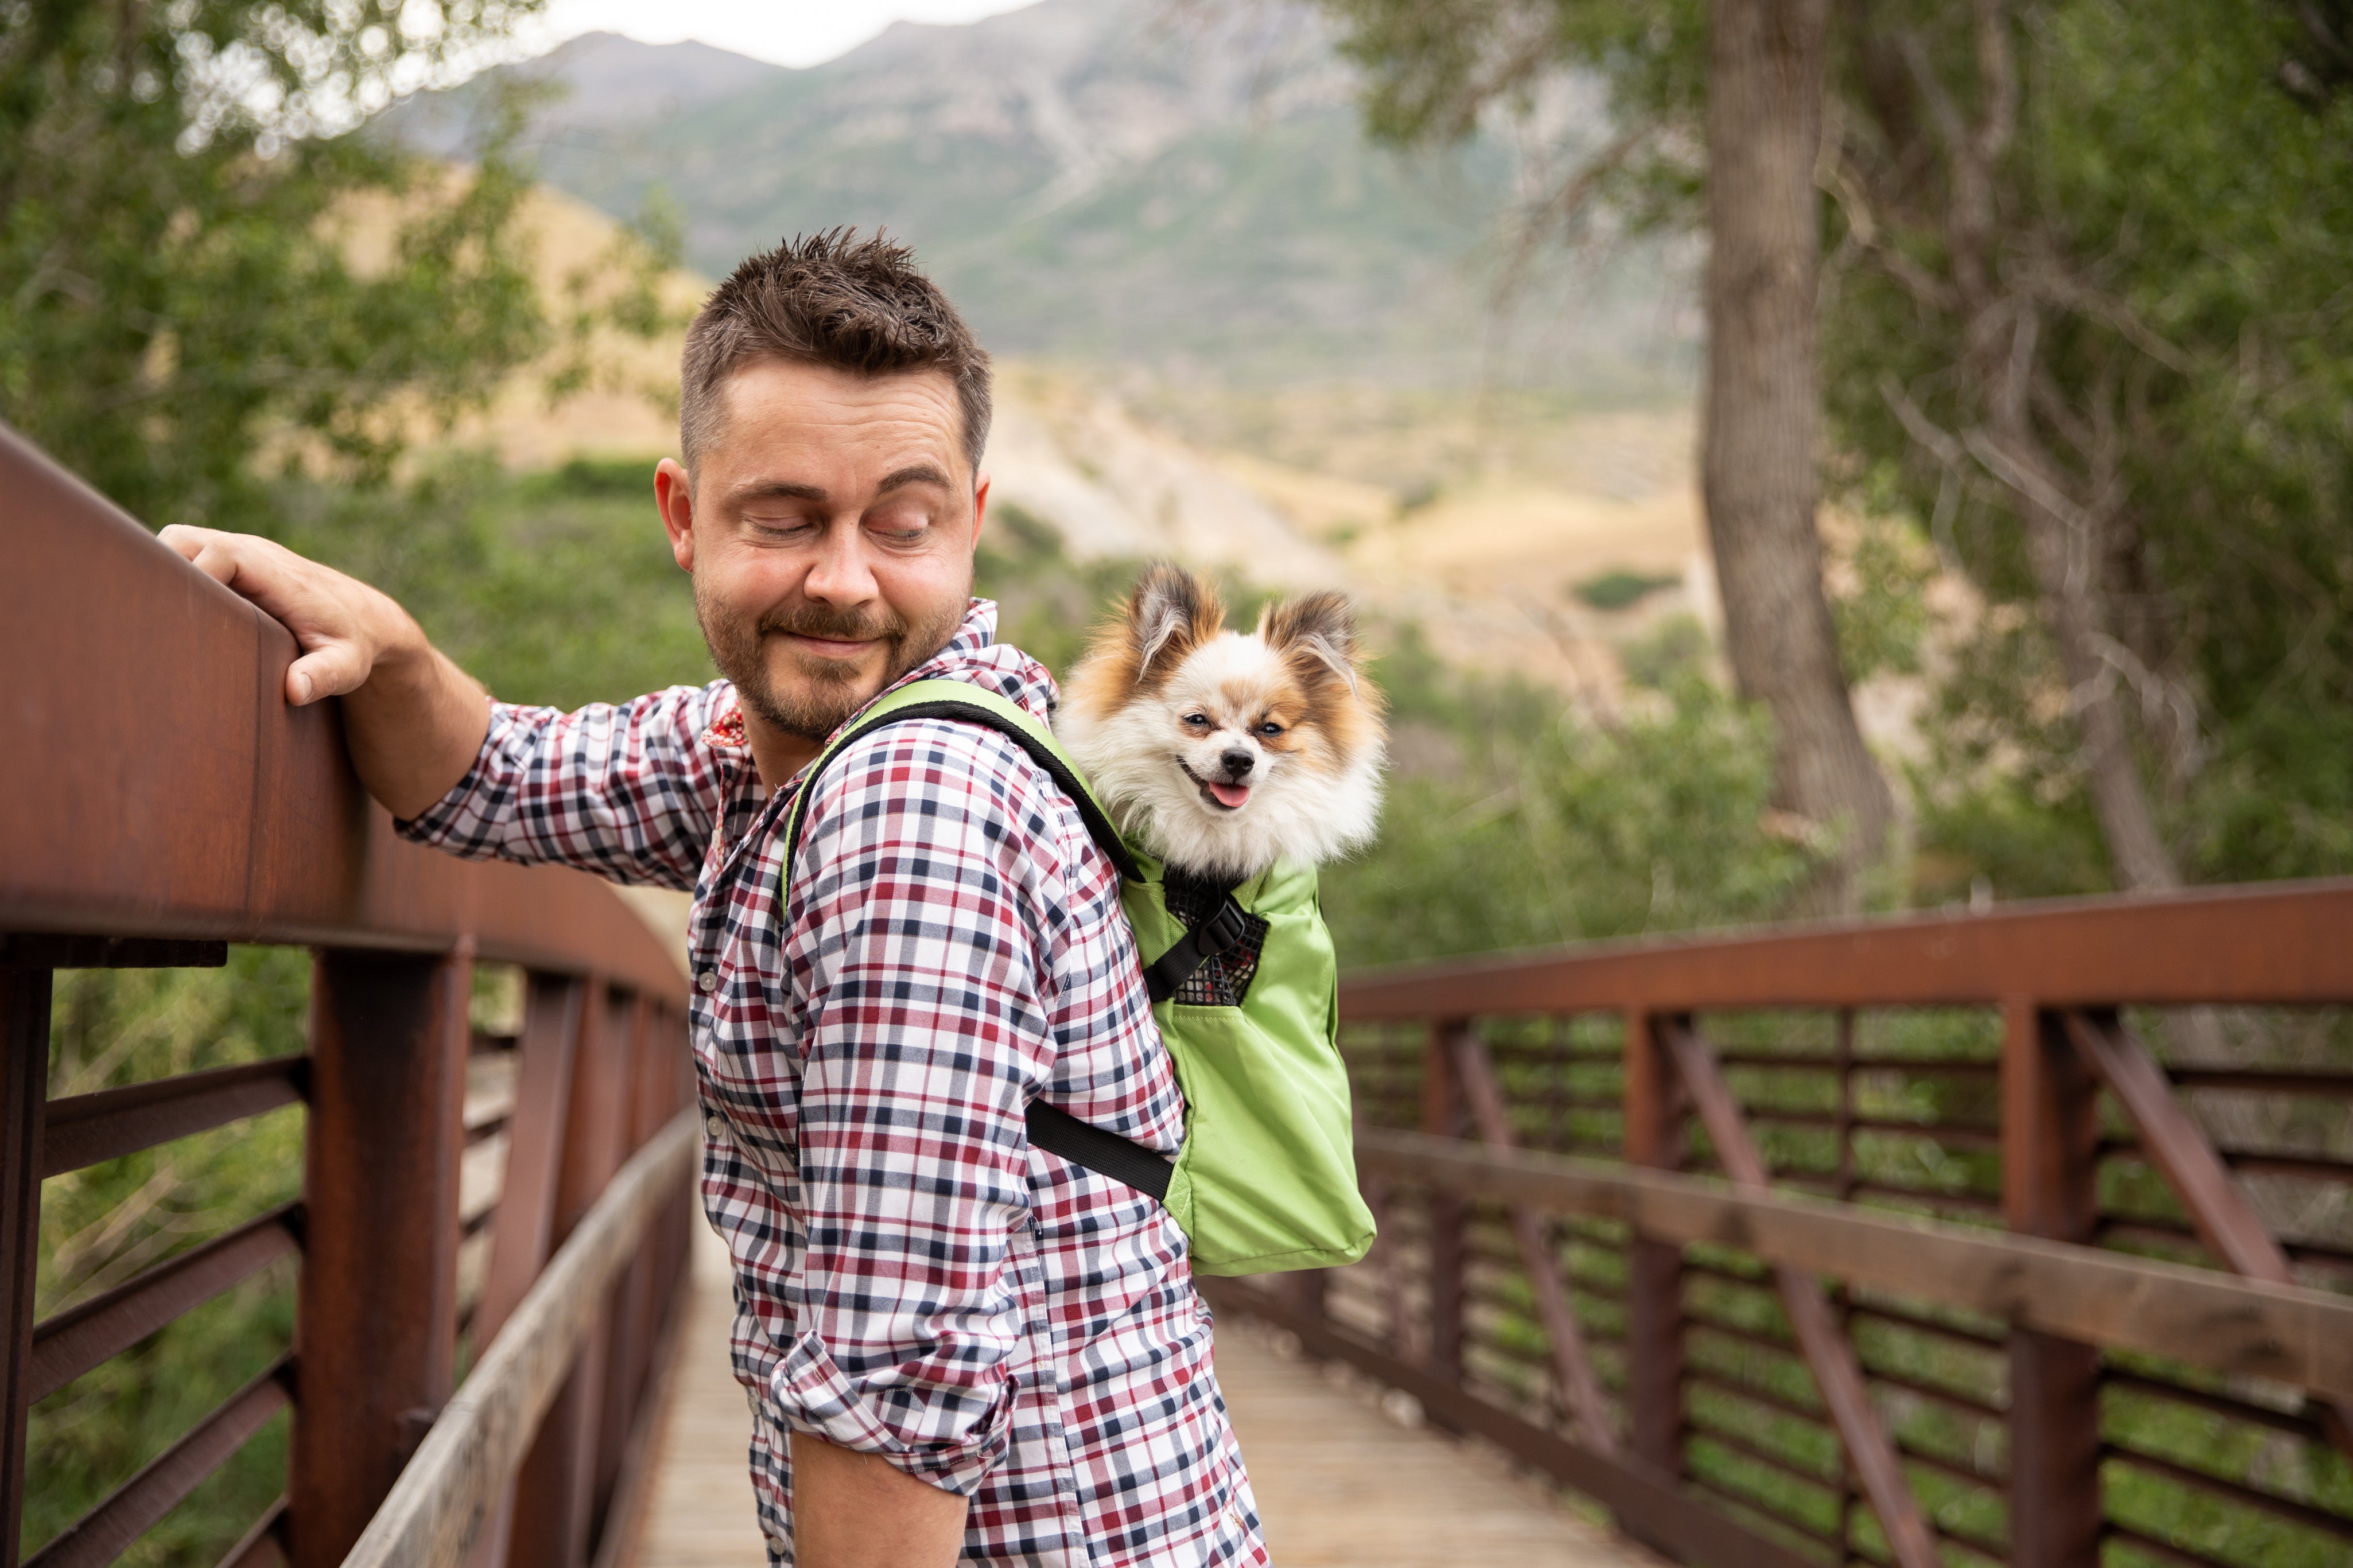 A small pomeranian rides in a Trainer carrier